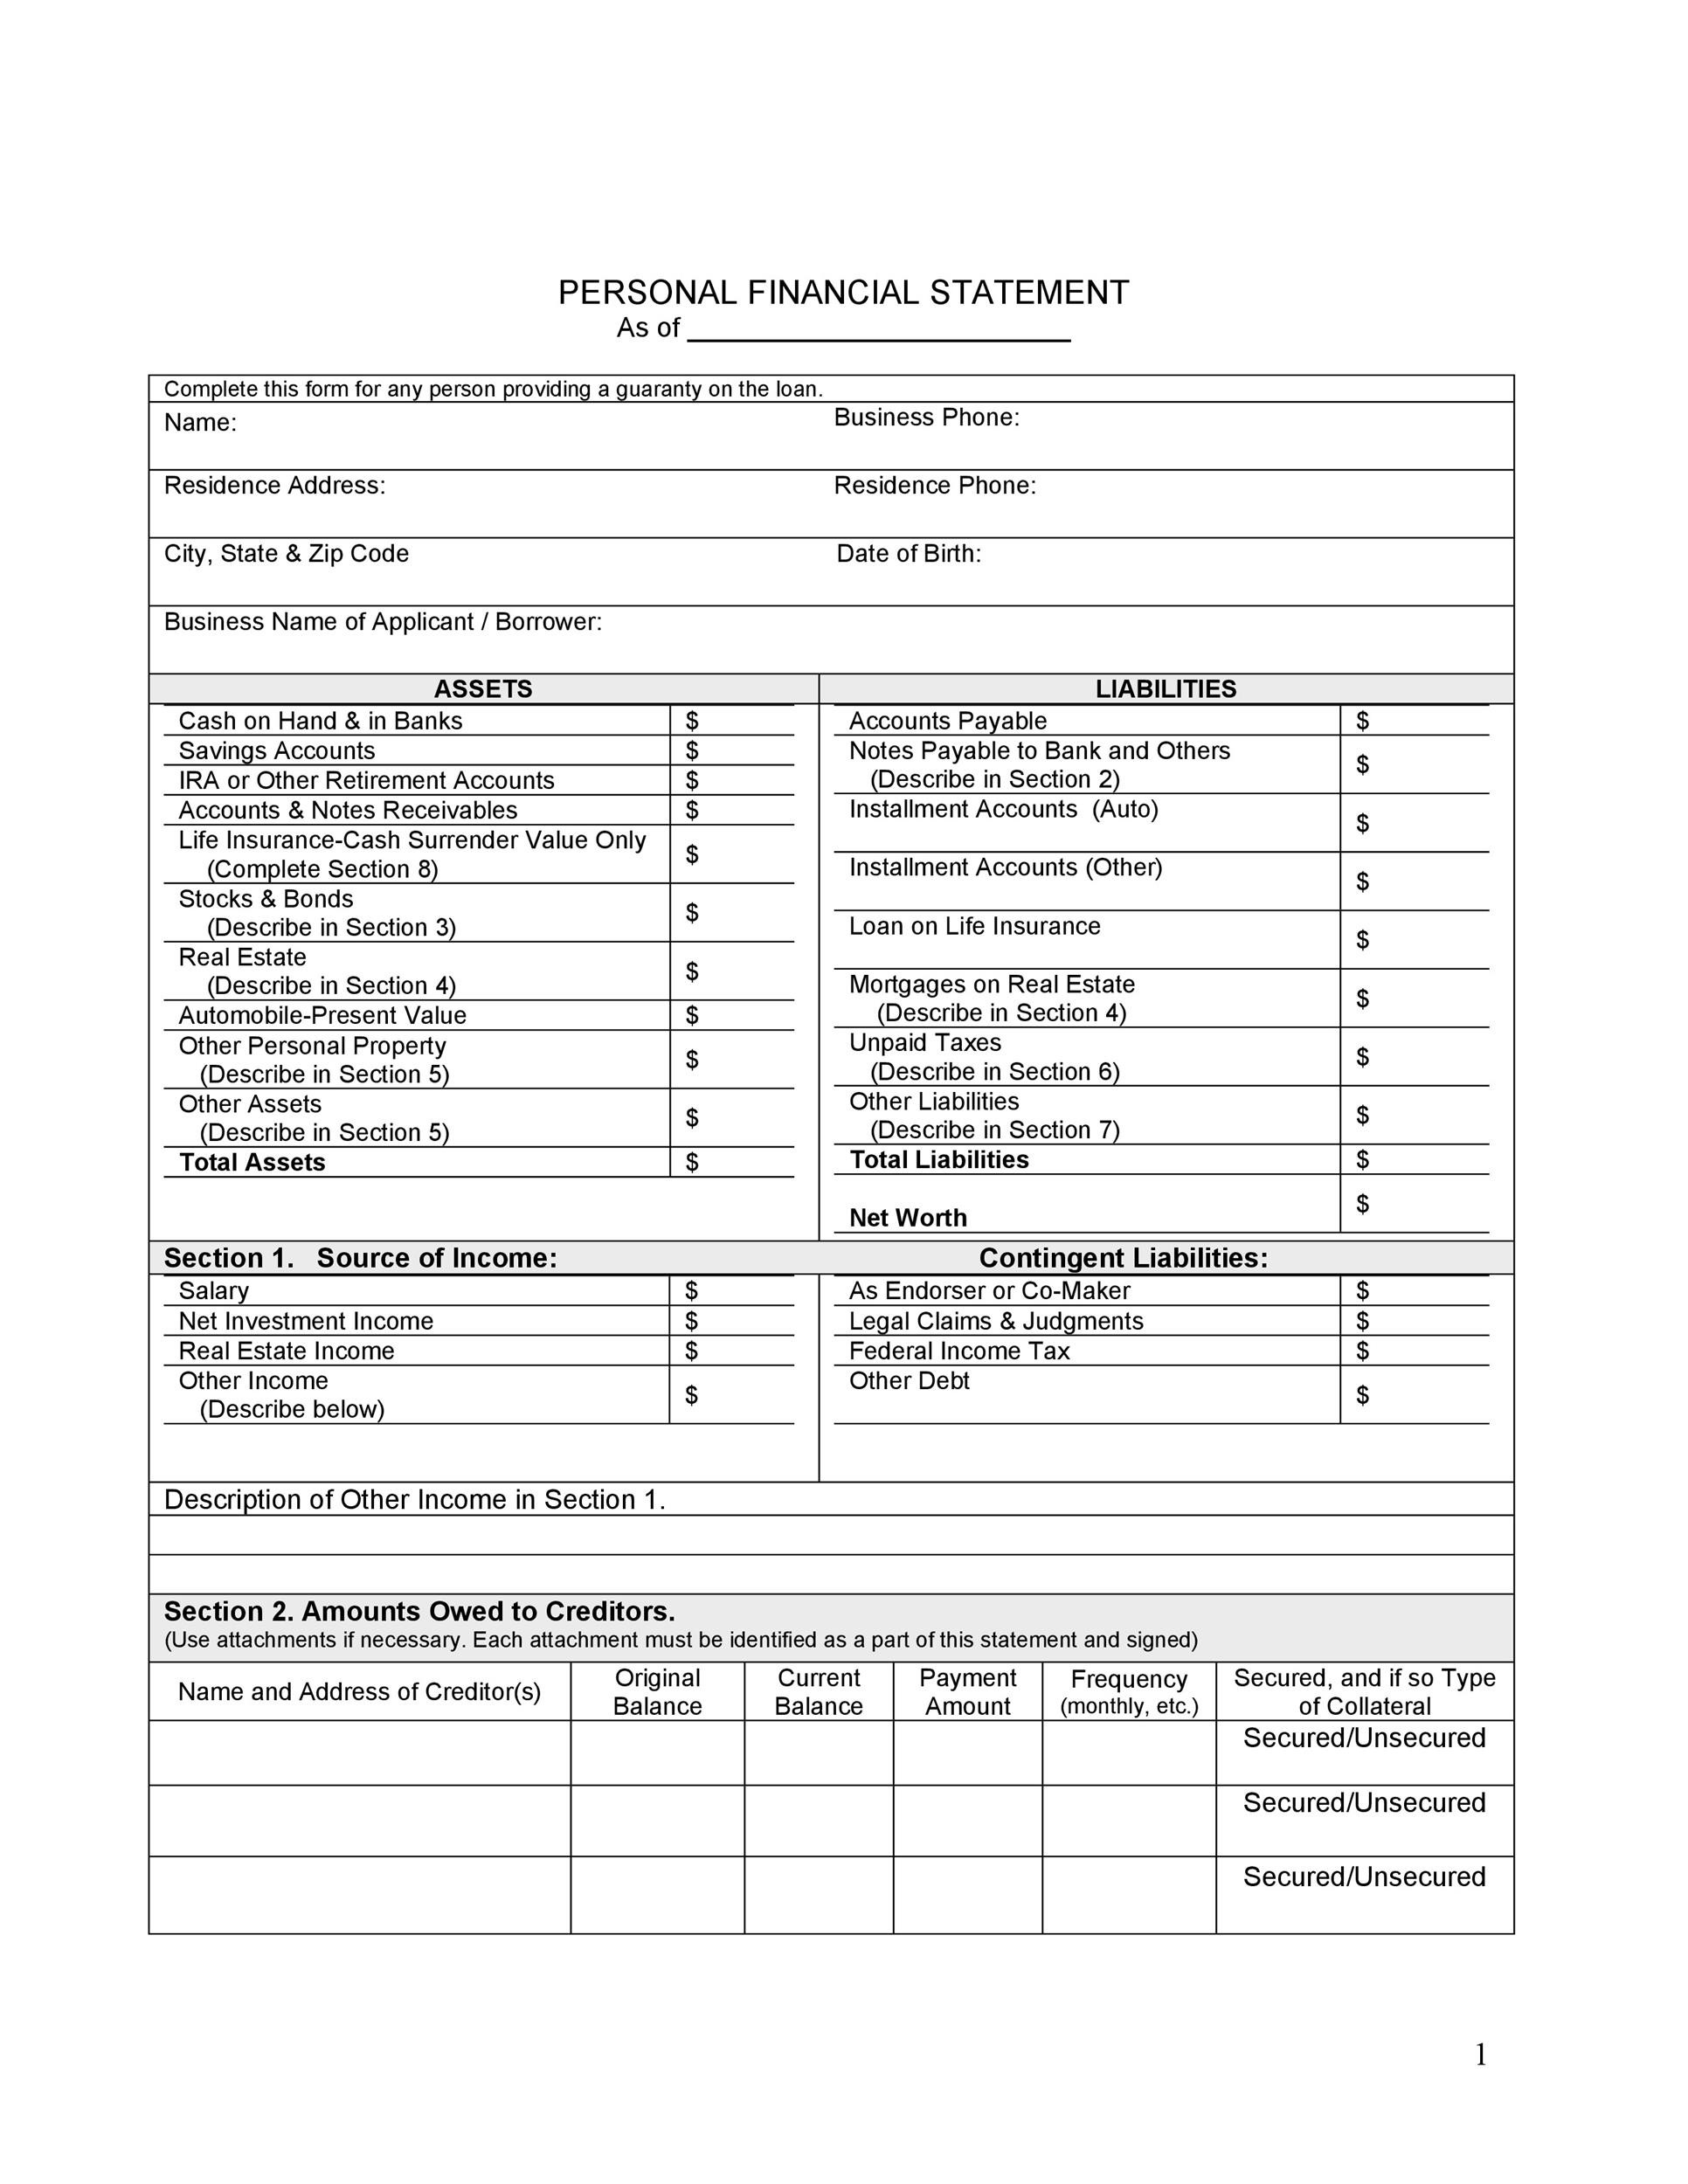 personal financial statement template excel free download